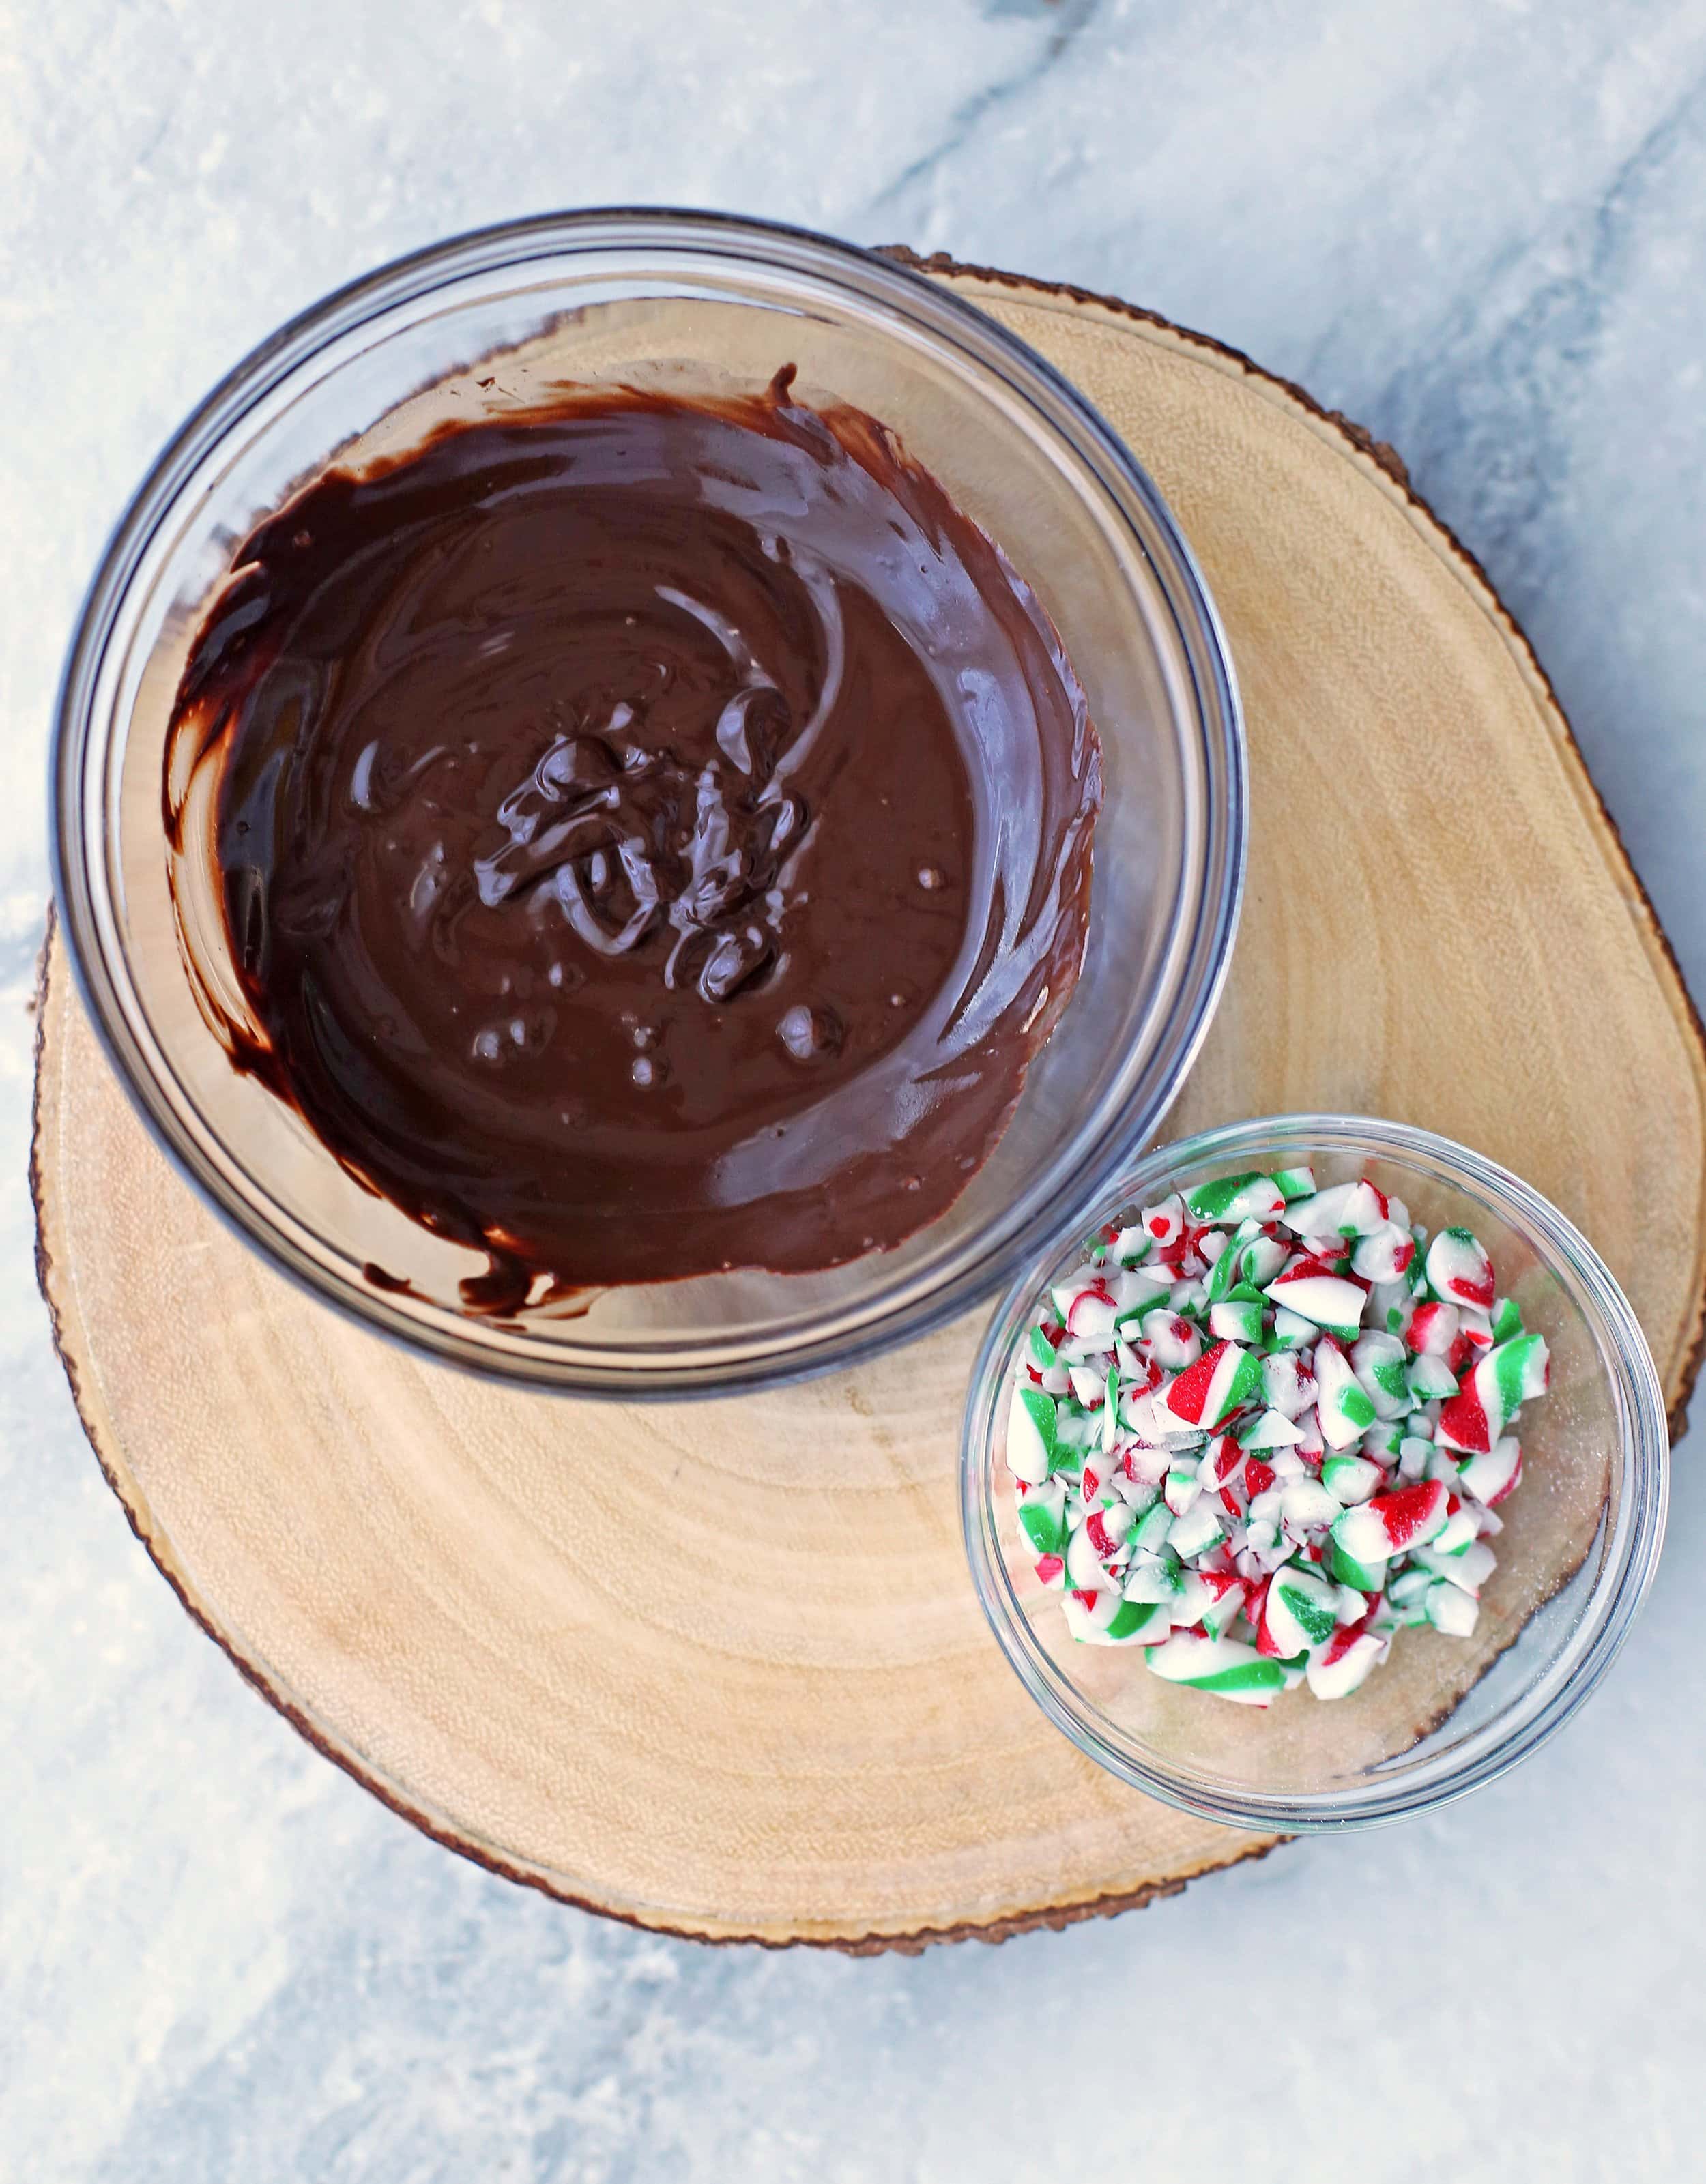 Melted milk chocolate and crushed candy canes divided into two glass bowls.